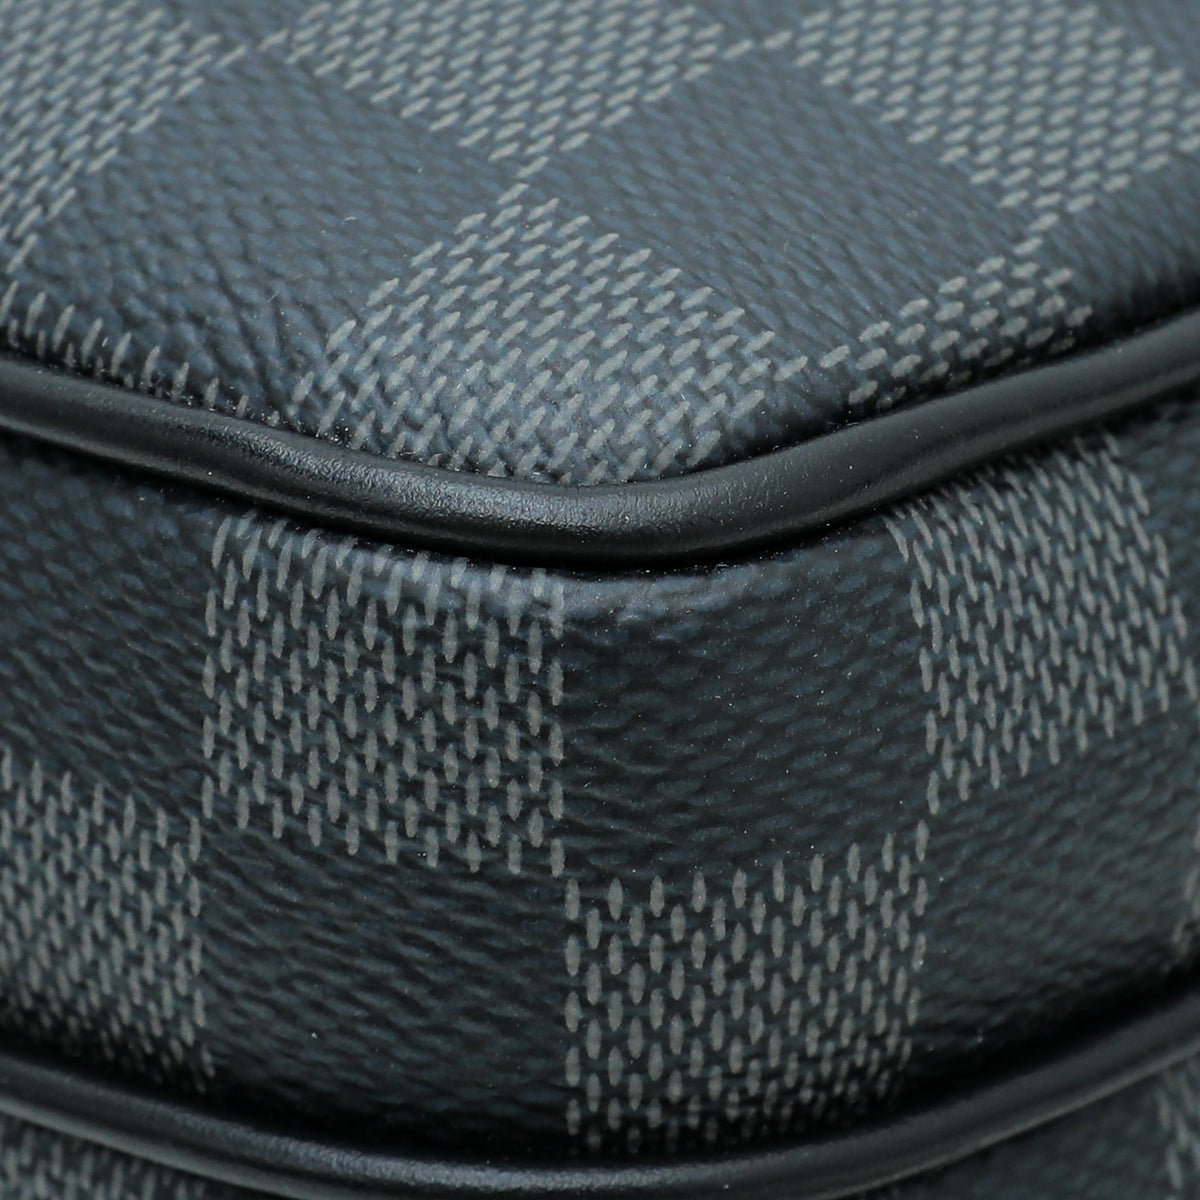 Load image into Gallery viewer, Louis Vuitton Damier Graphite Trocadero NM PM Bag
